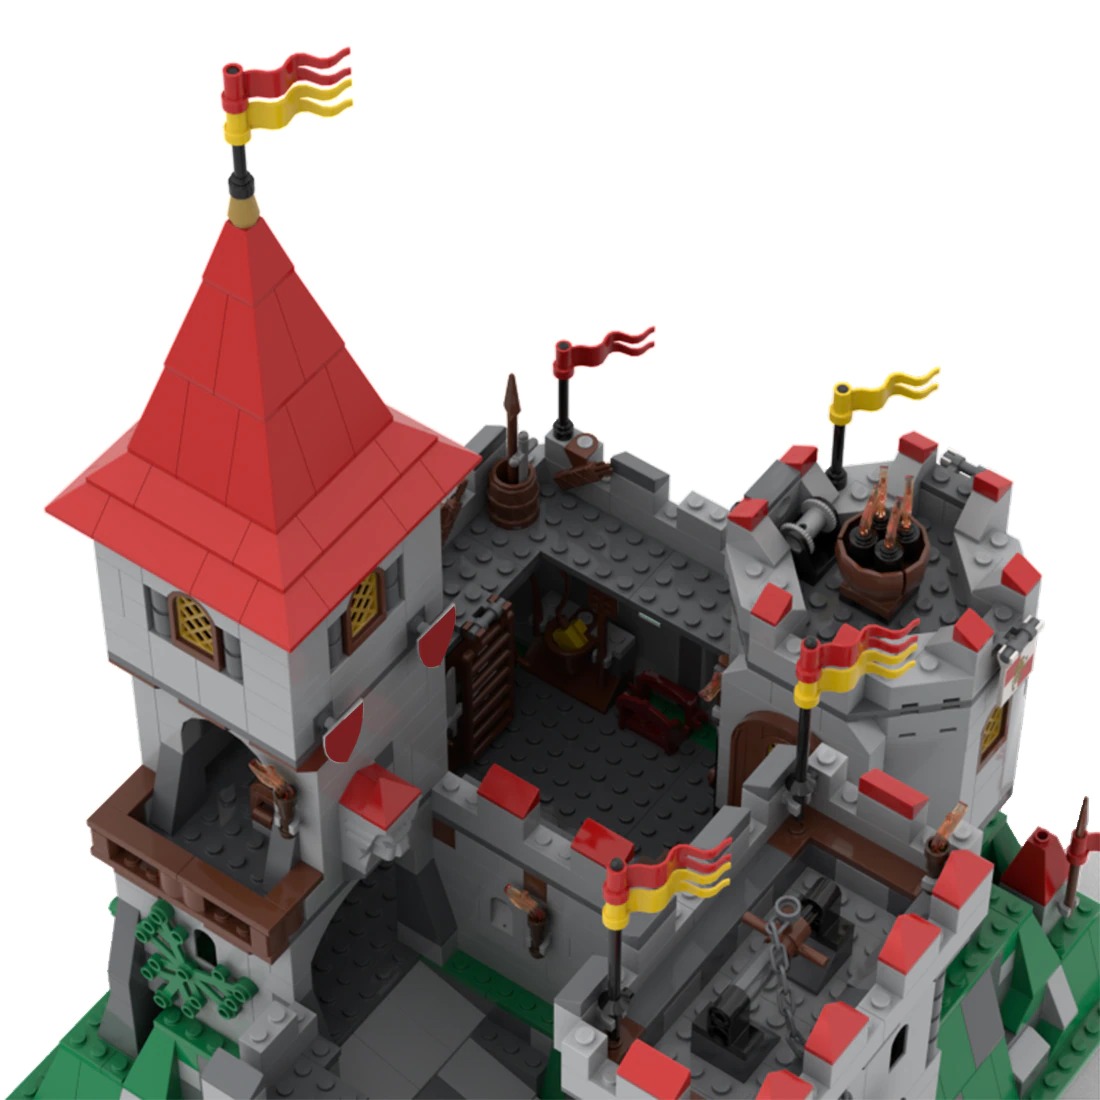 MOCBRICKLAND MOC-102994 King’s Mountain Castle from 7946